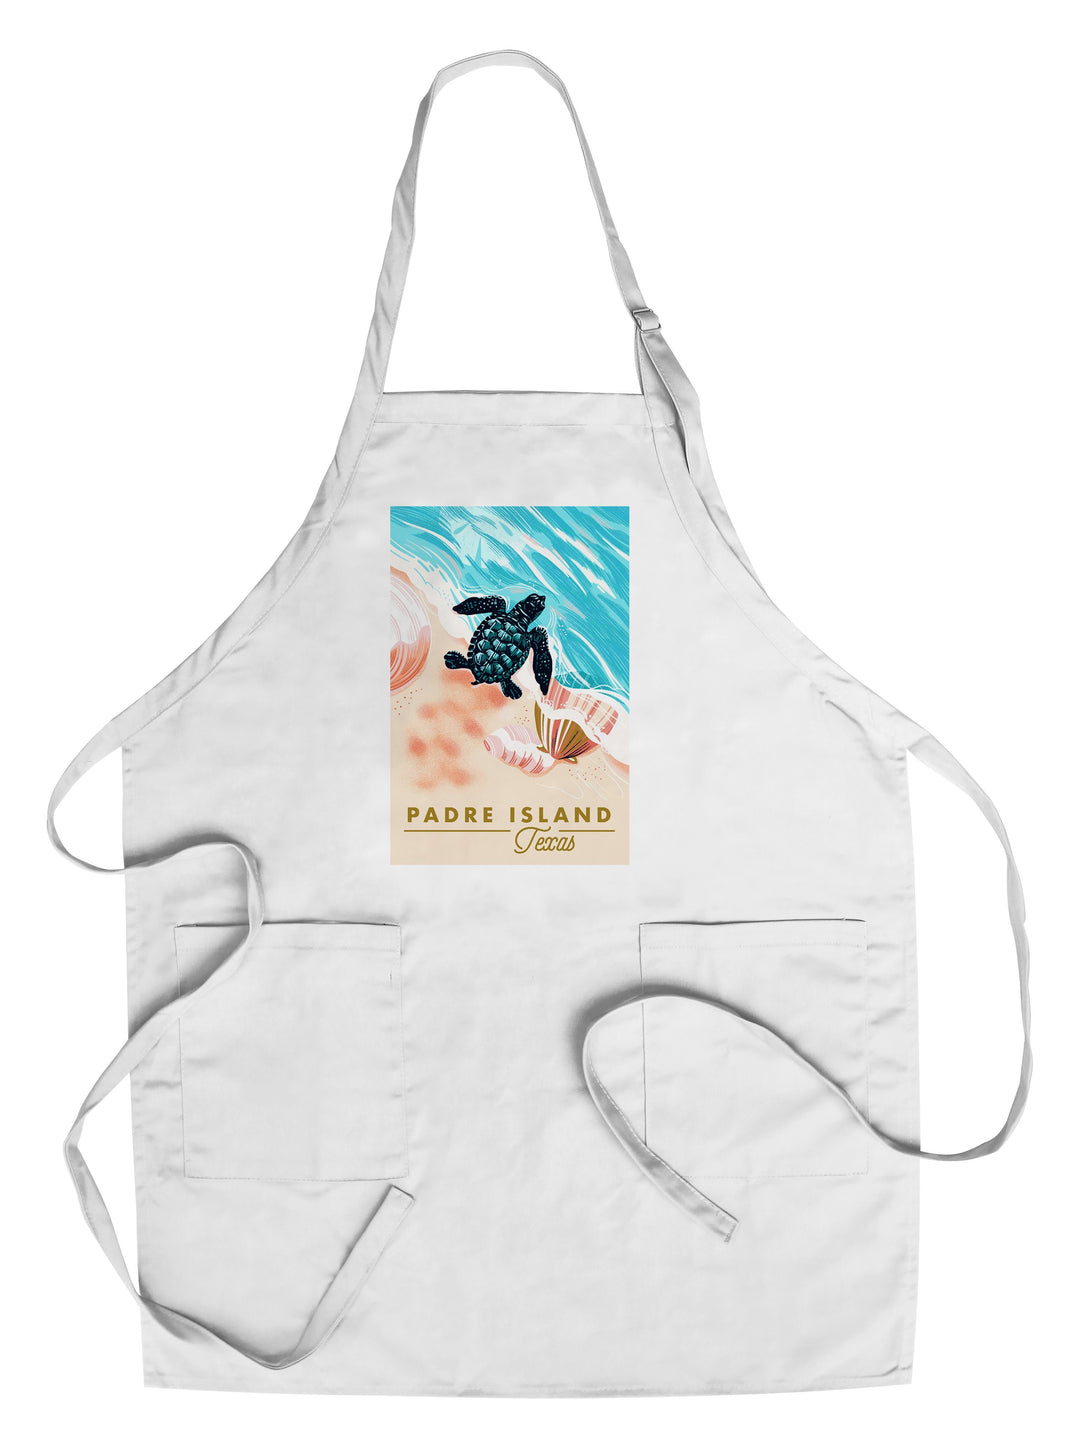 Padre Island, Texas, Courageous Explorer Collection, Turtle and Shells, Safely to Sea, Towels and Aprons Kitchen Lantern Press Chef's Apron 